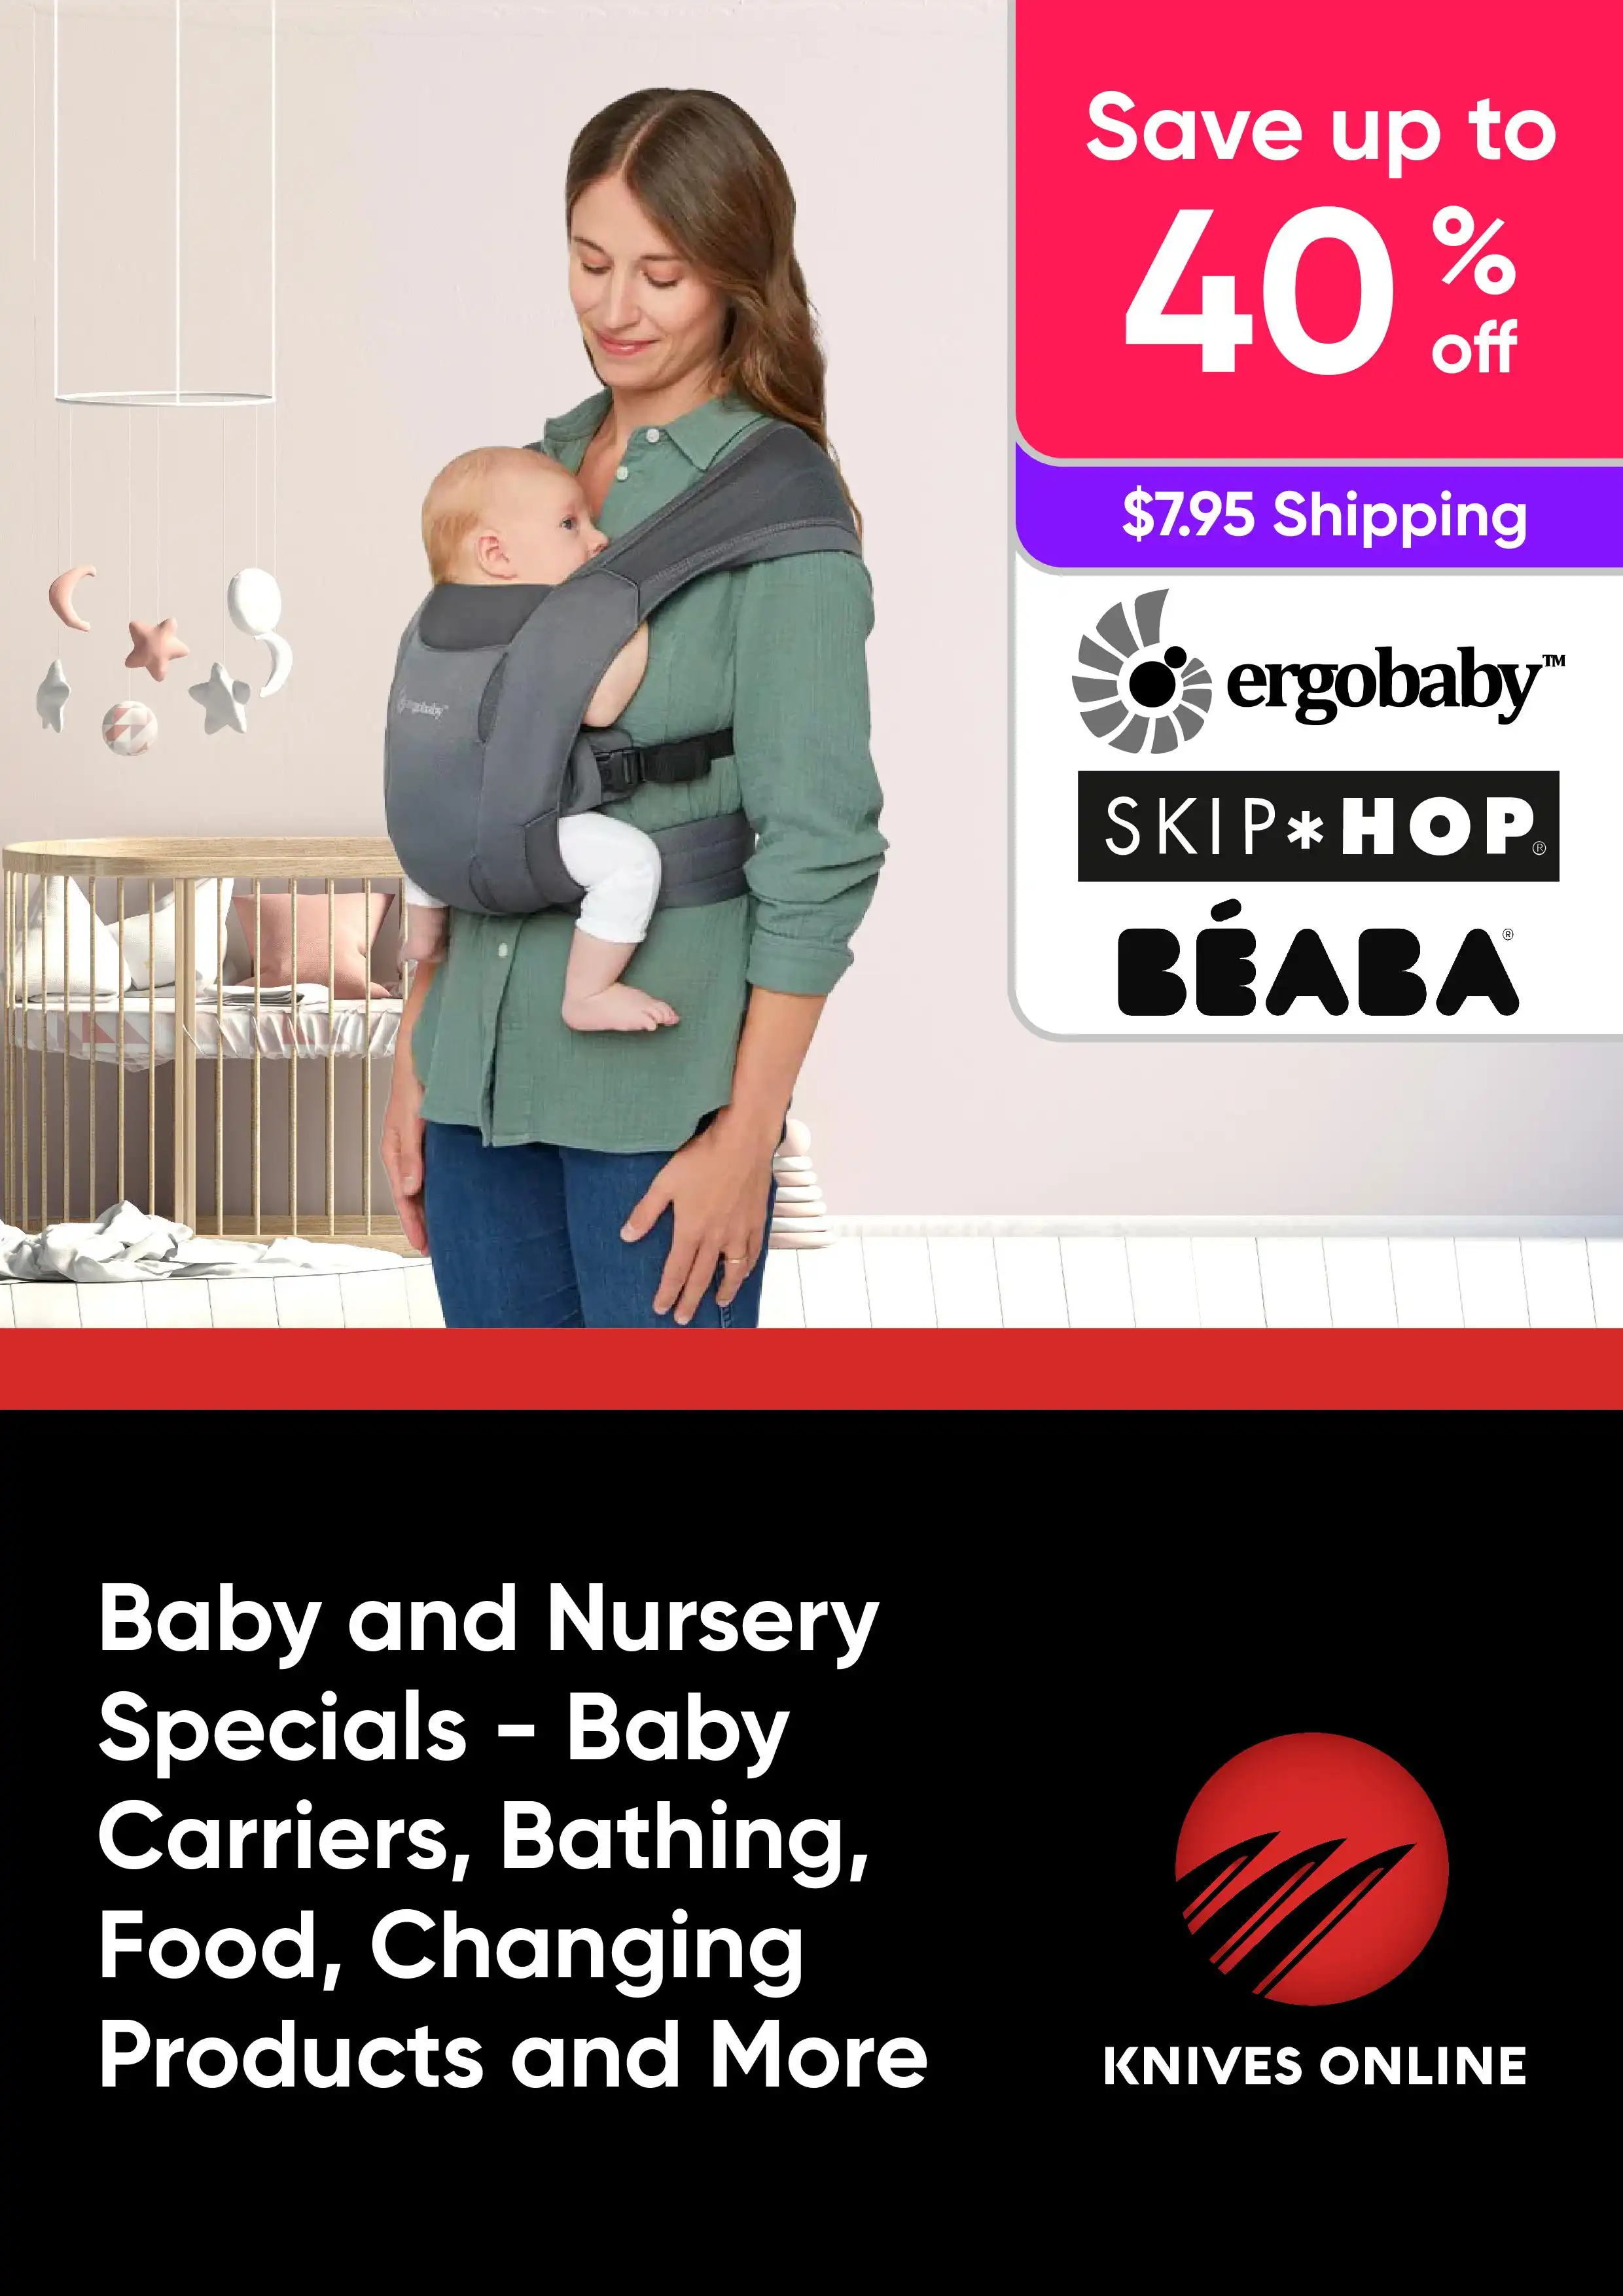 Baby and Nursery Specials - Baby Carriers, Bathing, Food Processors and More - Ergobaby, Skip Hop, Beaba - Up to 40% off 